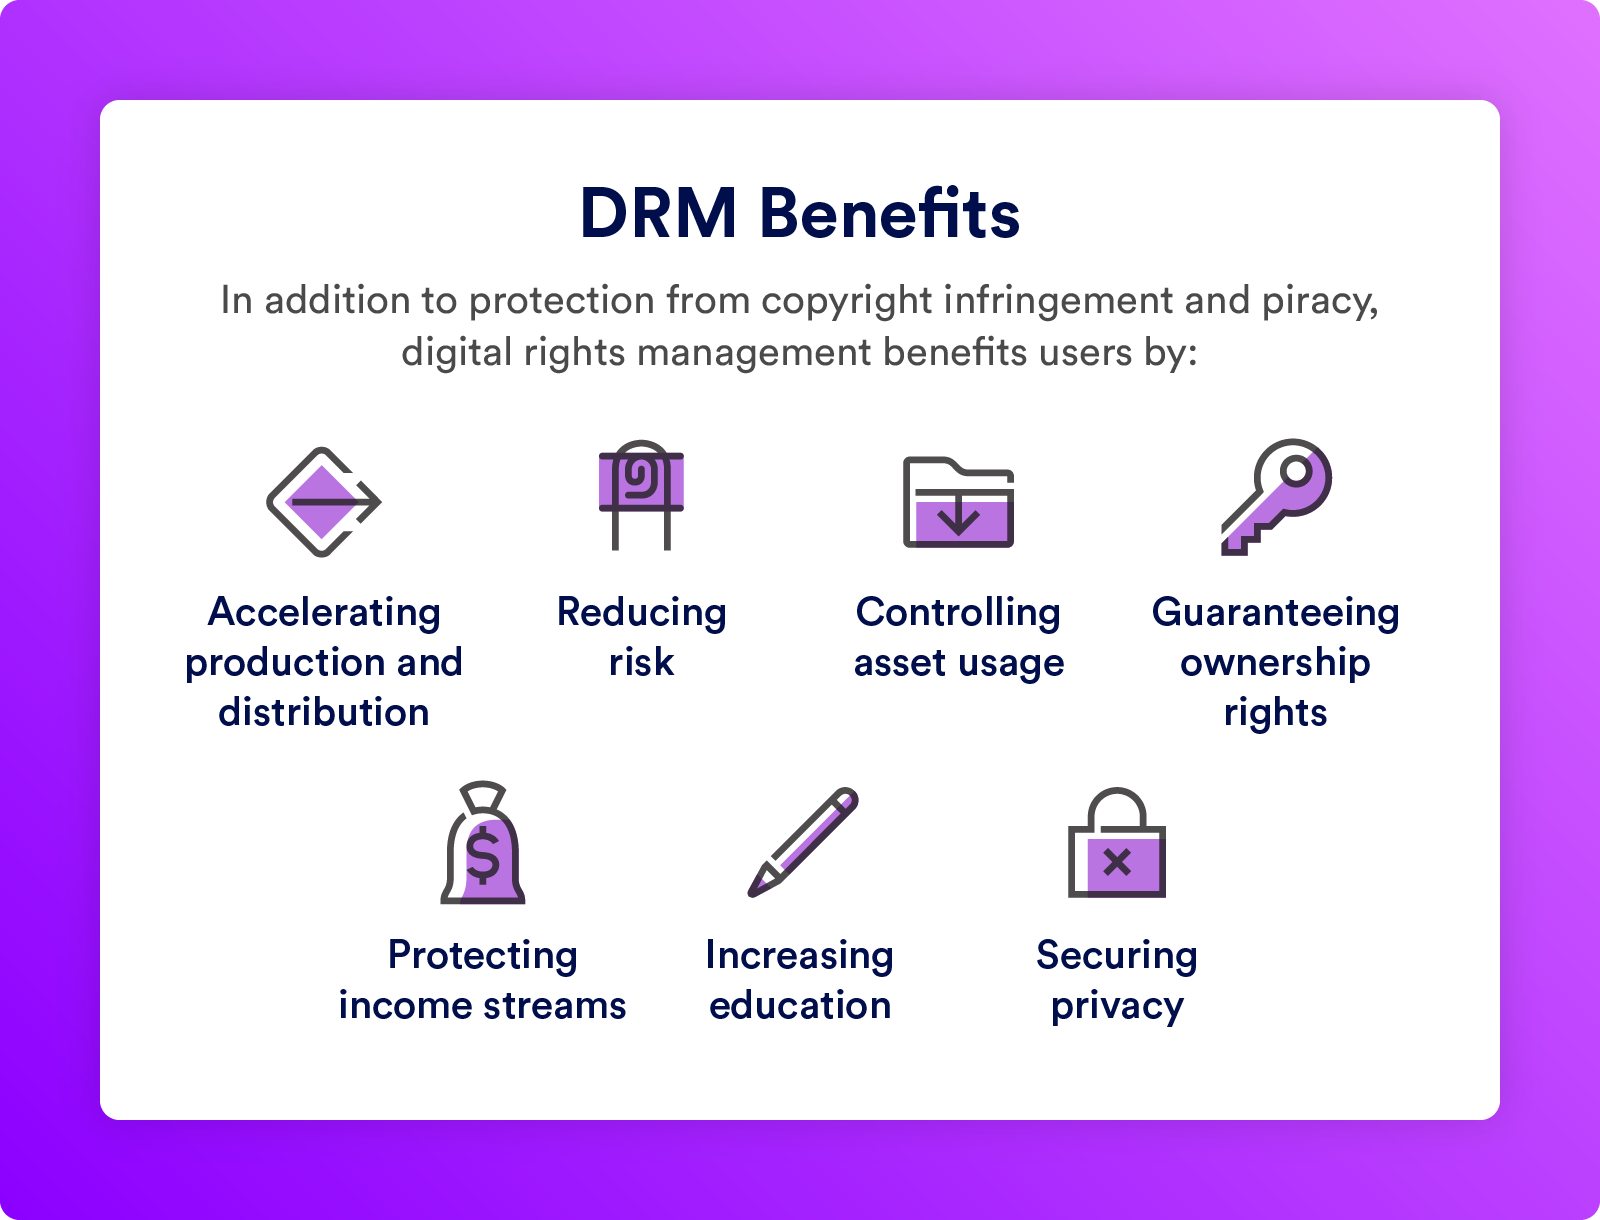 Reduced risk, increased privacy, and controlled usage are DRM benefits.